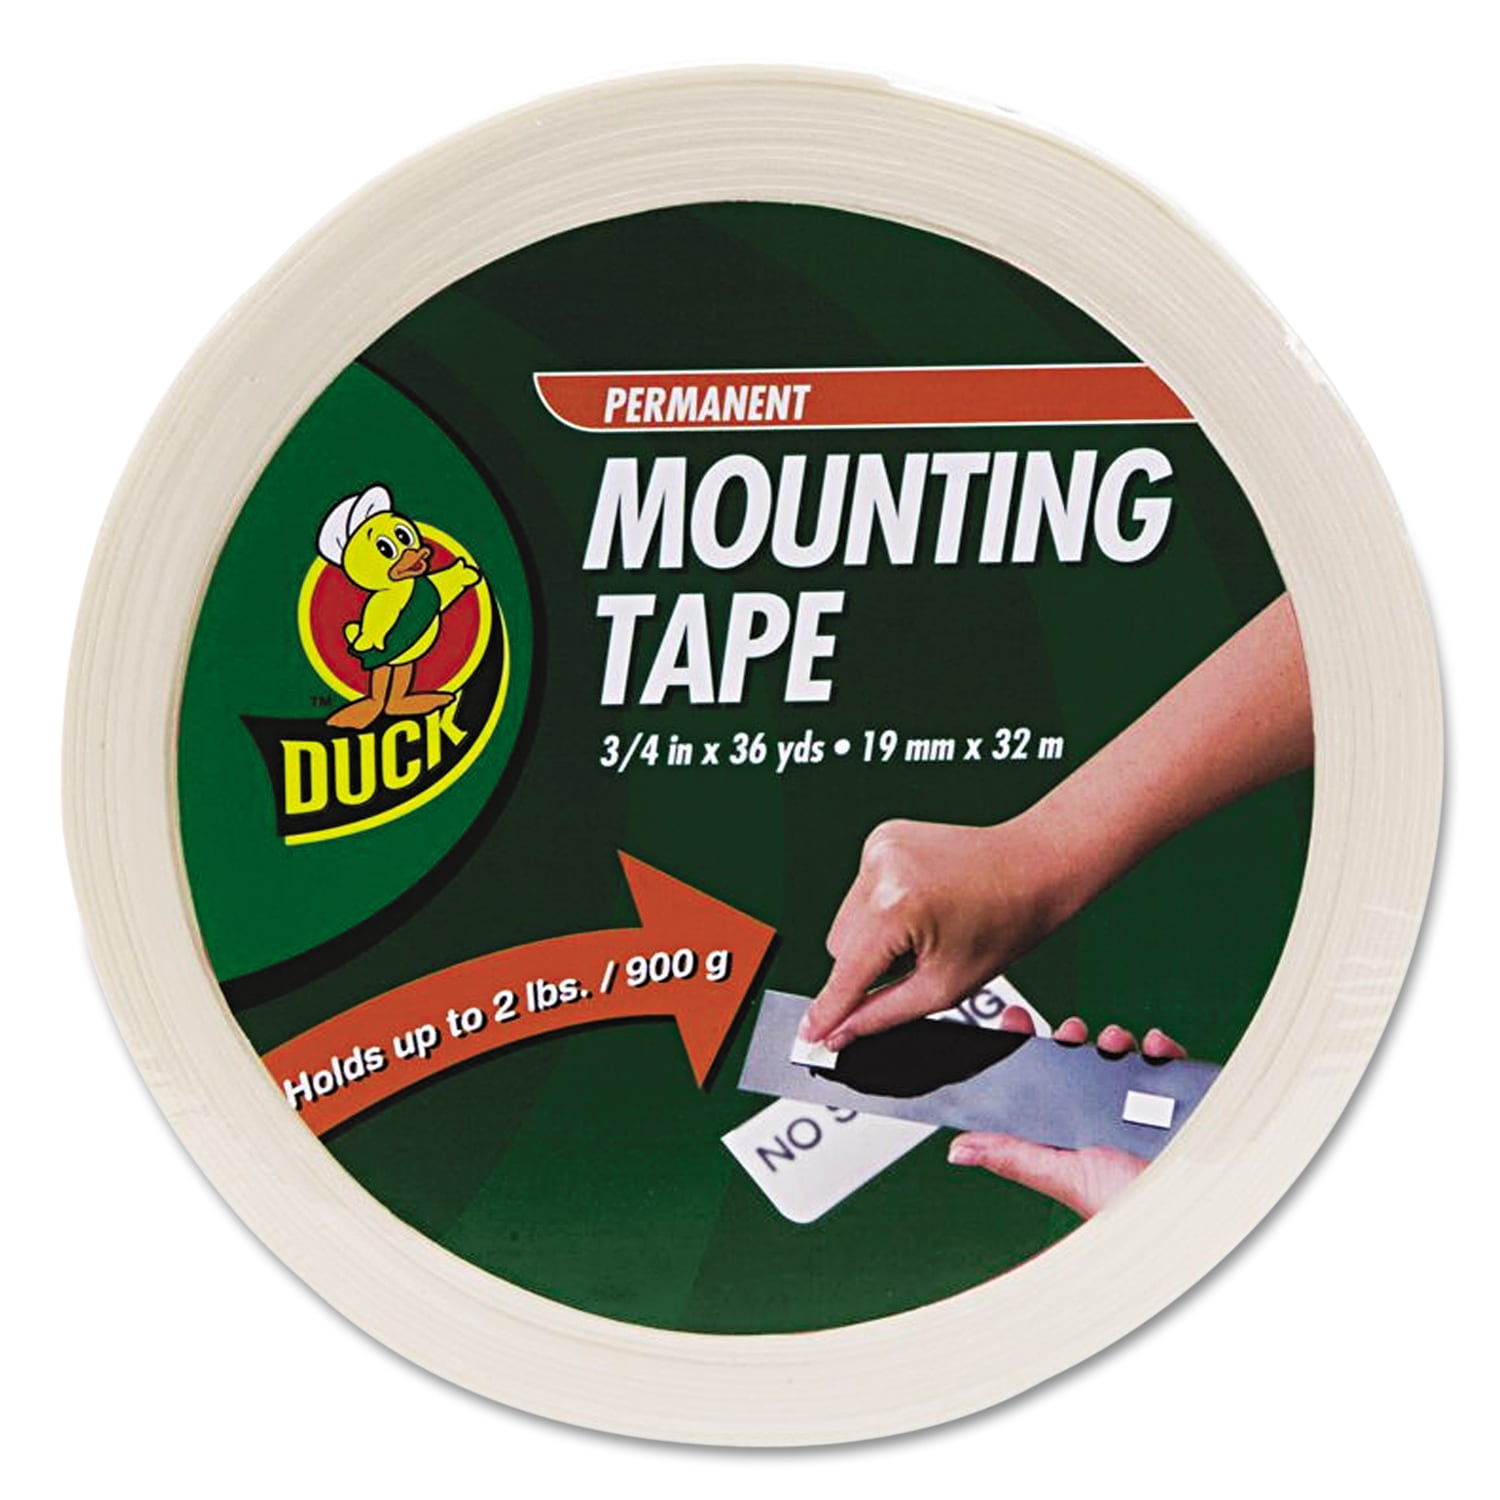 36 Feet Duck® Double-Sided Duct Tape 1.41 Width x 12 Yards Case of 8 Rolls by Electriduct 